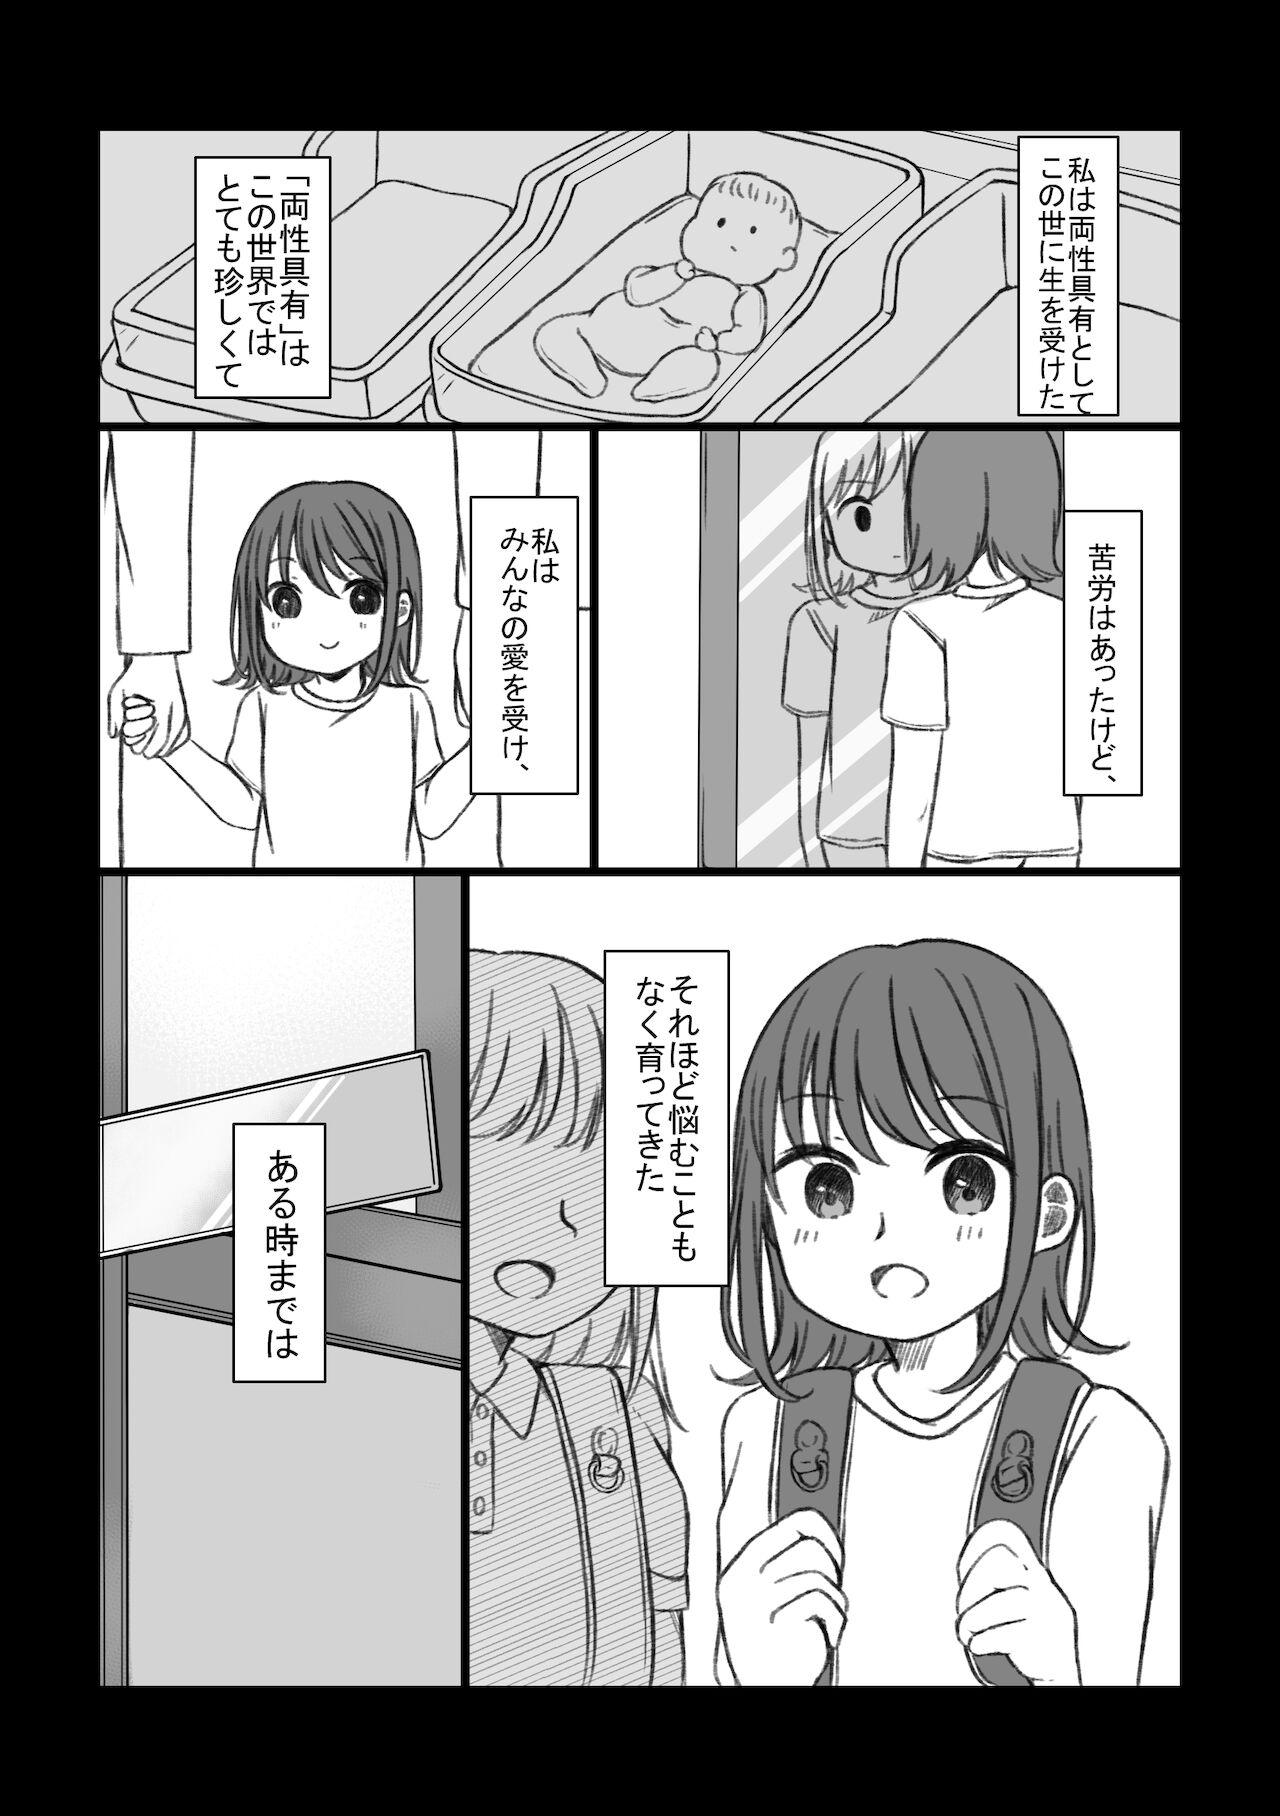 Spooning 恋するちん子はまだ夢のなか French - Page 4